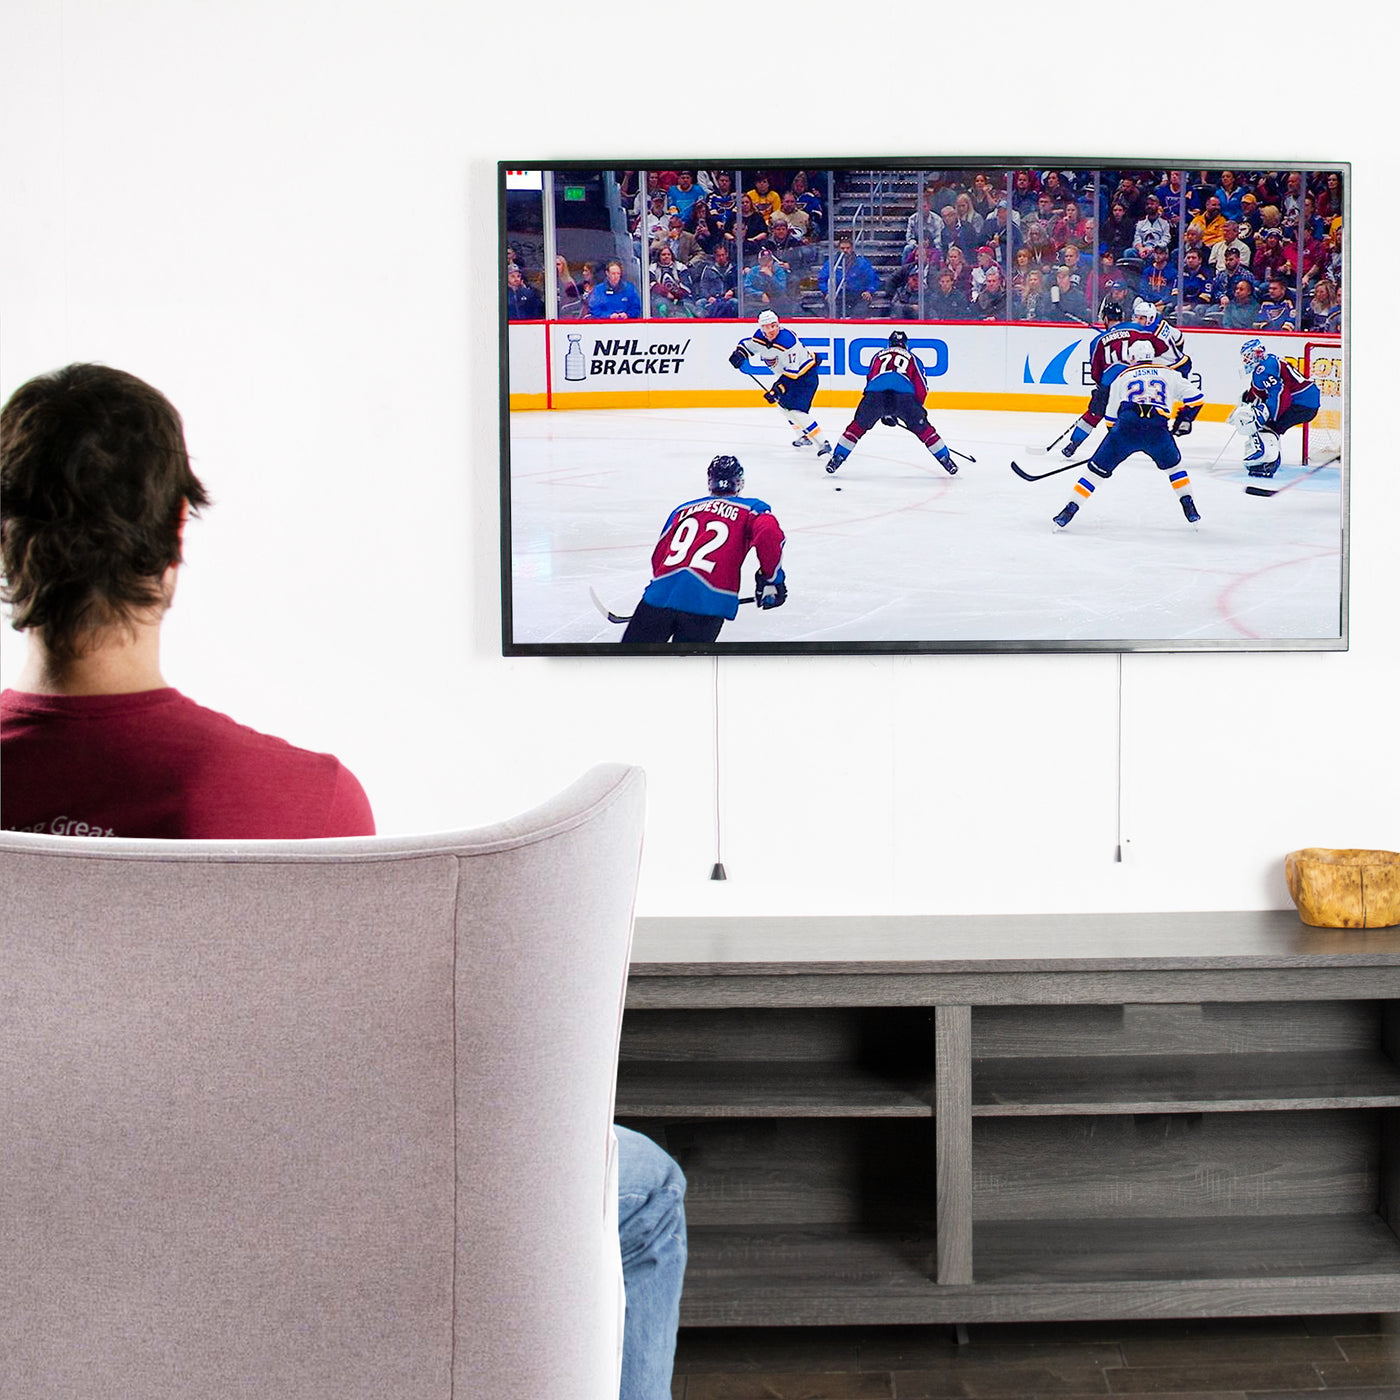 A man watching hockey on an extra large TV mounted to the wall.